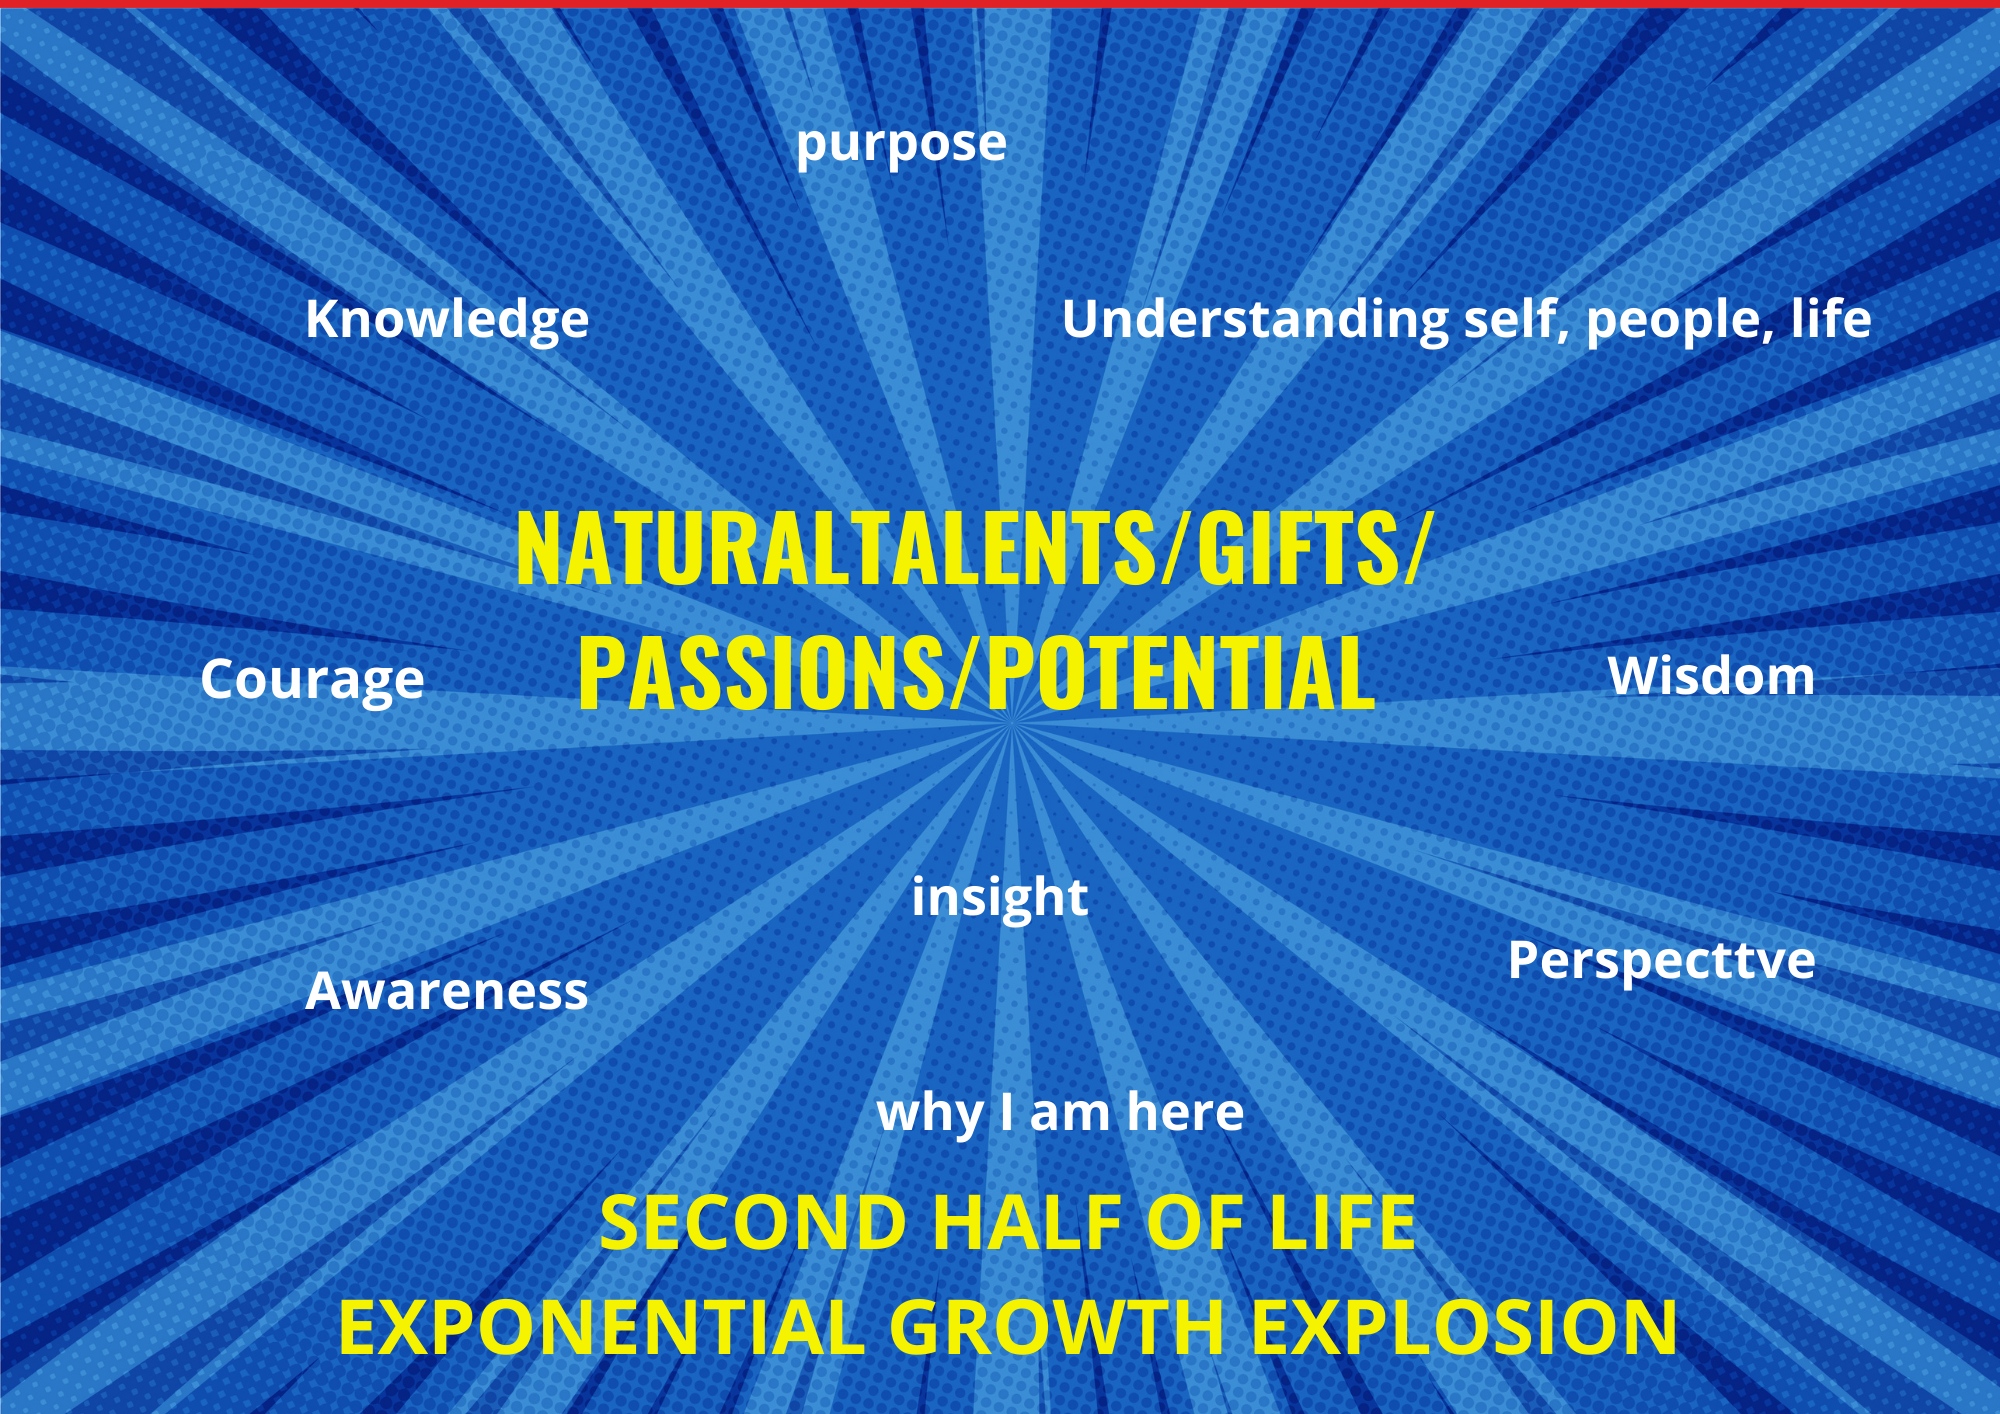 Exponental Growth Explosion